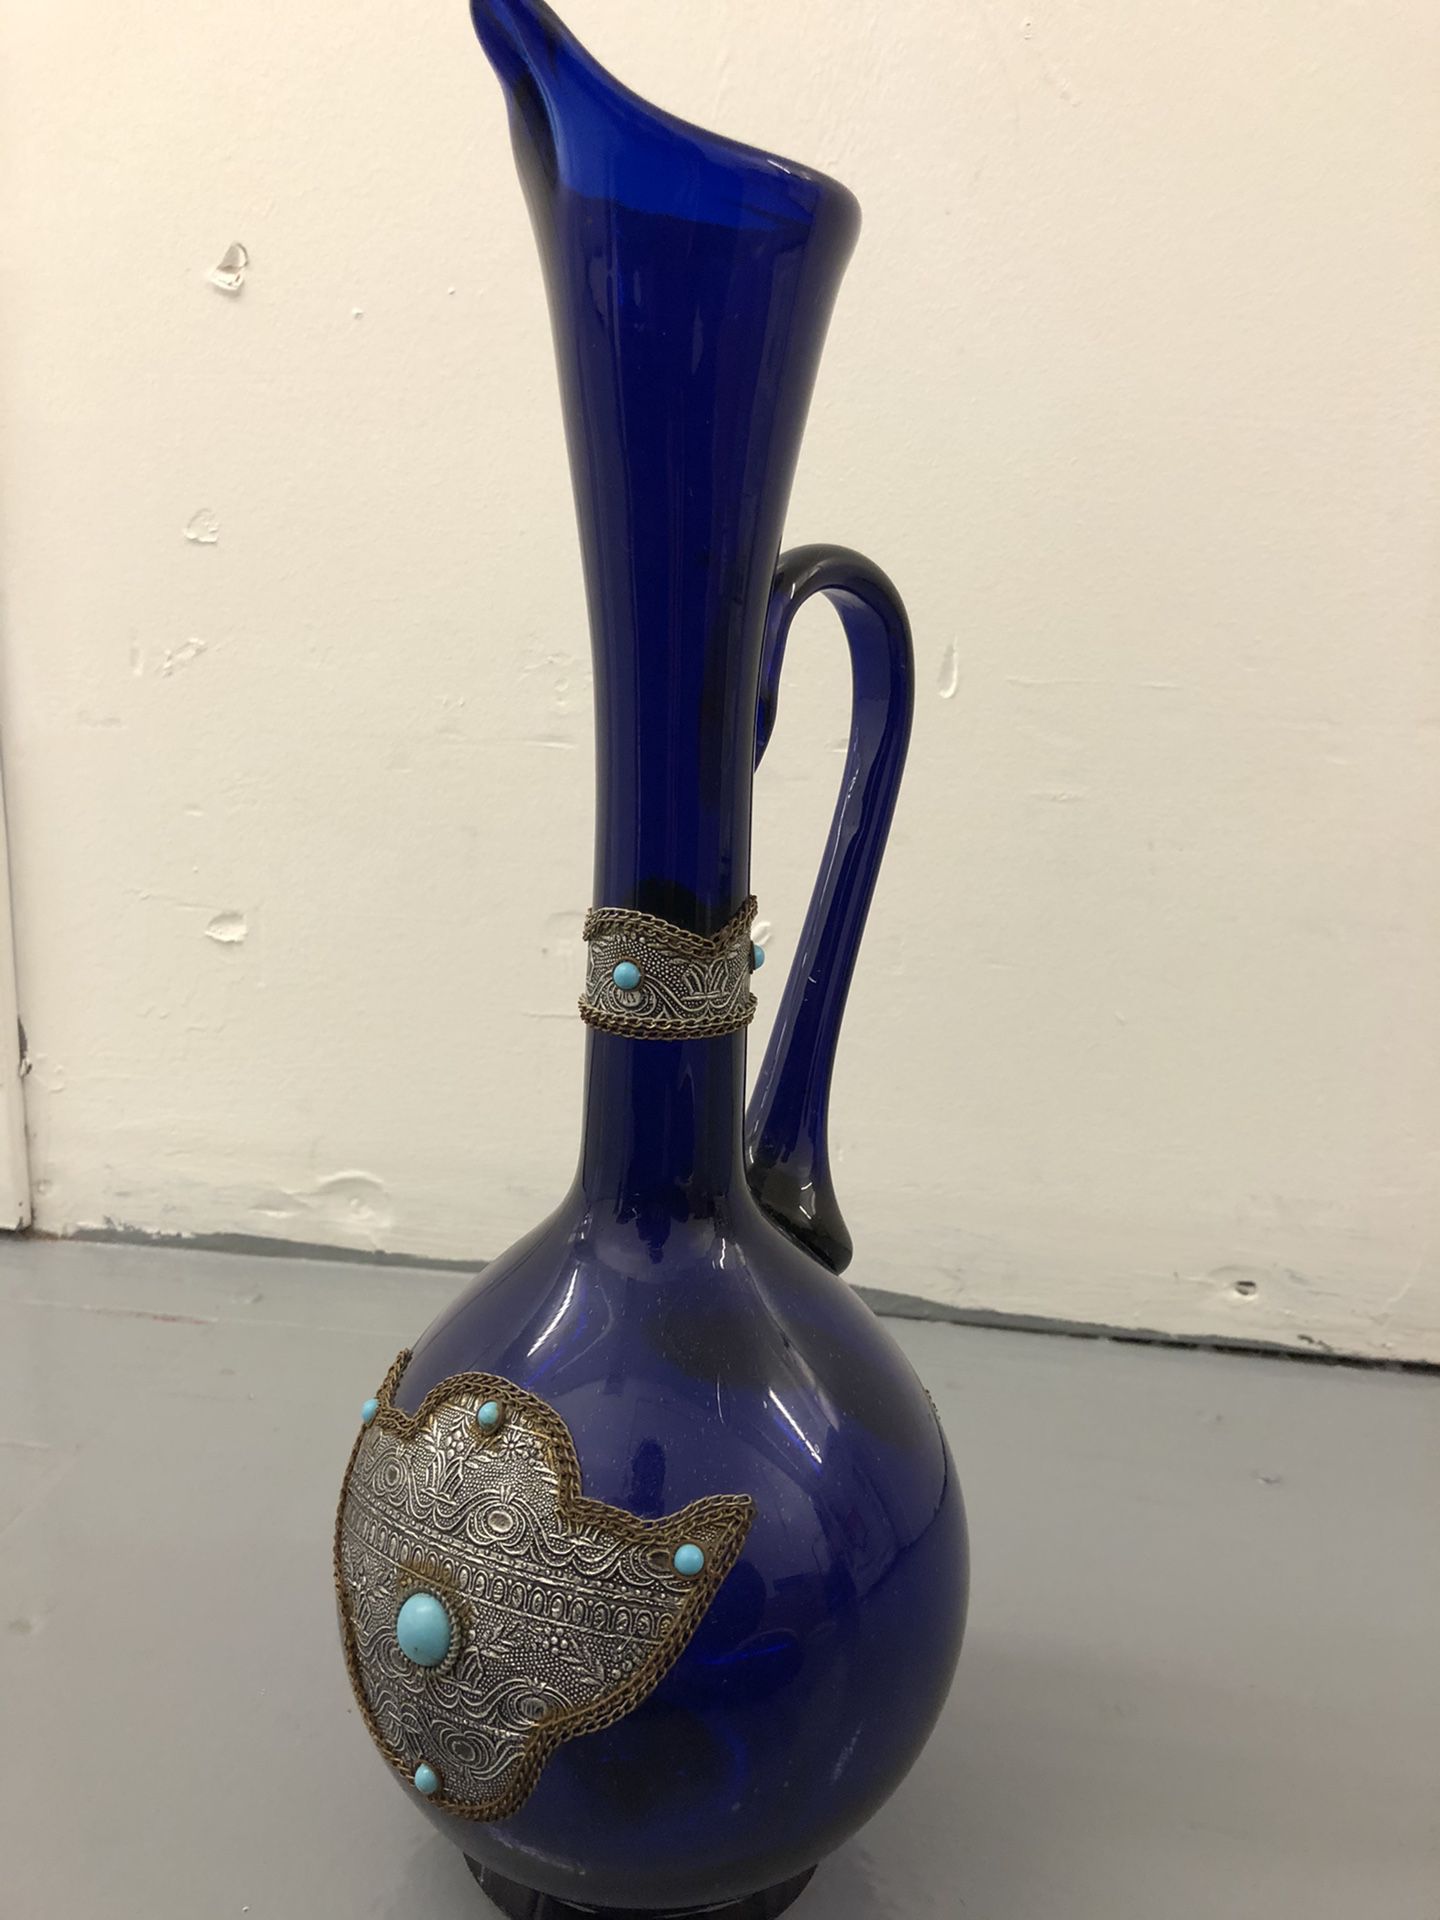 Cobalt Blue glass antique Persian water picture or vase.